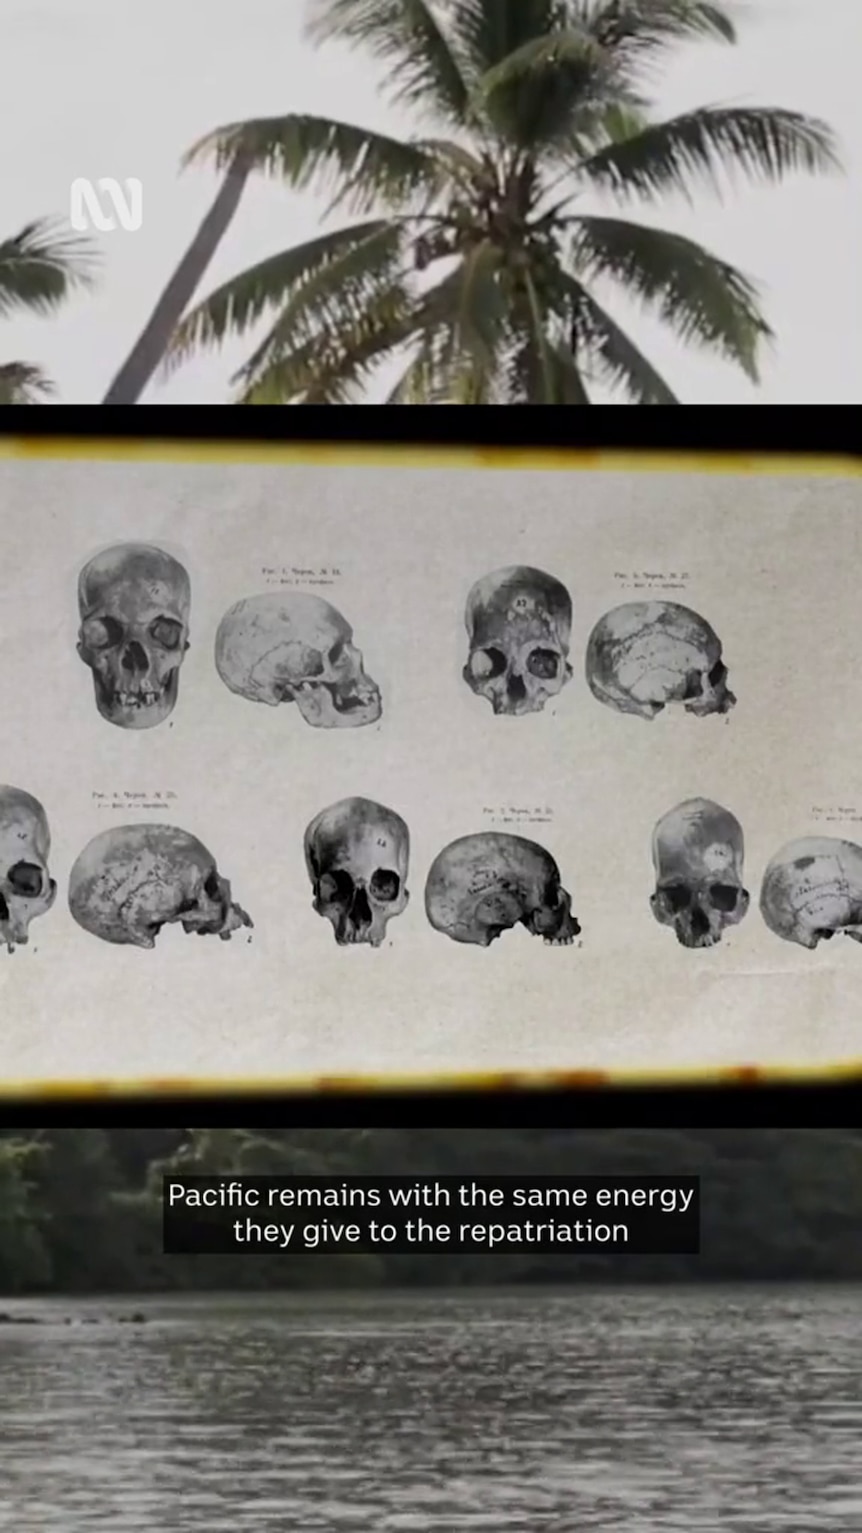 A number of skulls are shown lined up neatly on a white background with another shot of palms in the background